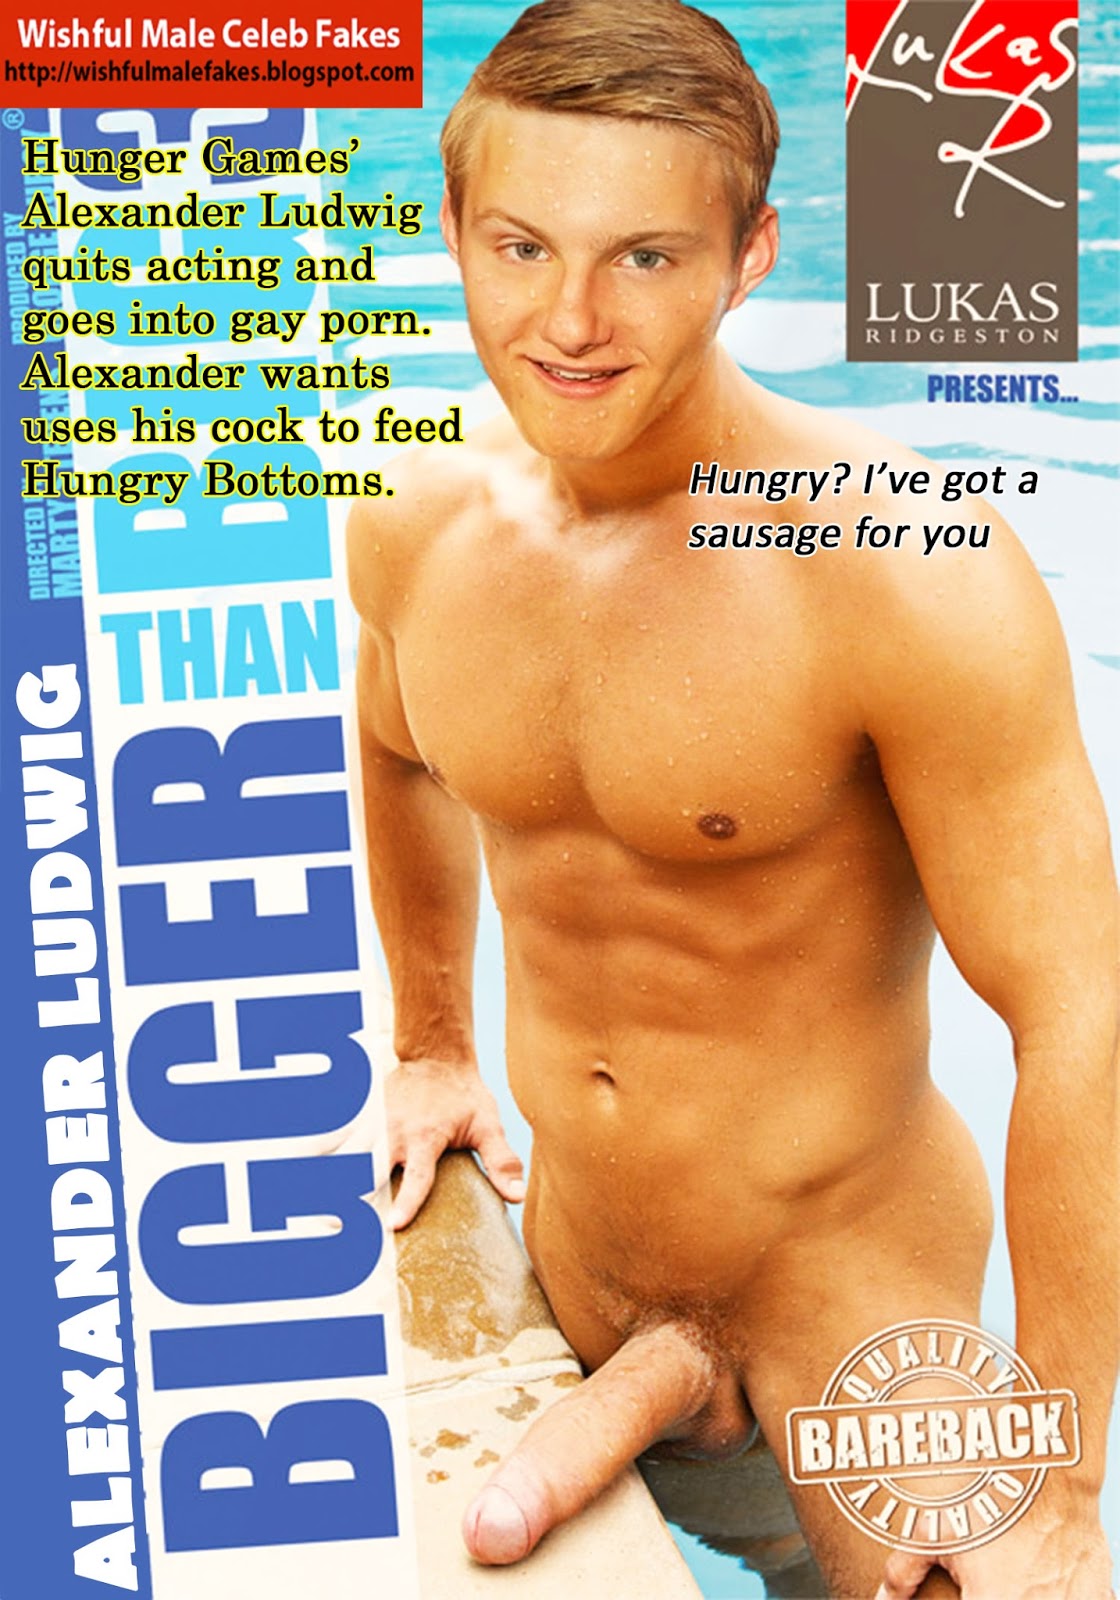 Hunger Games Gay Porn - Apply To Be A Gay Porn Star image #133862